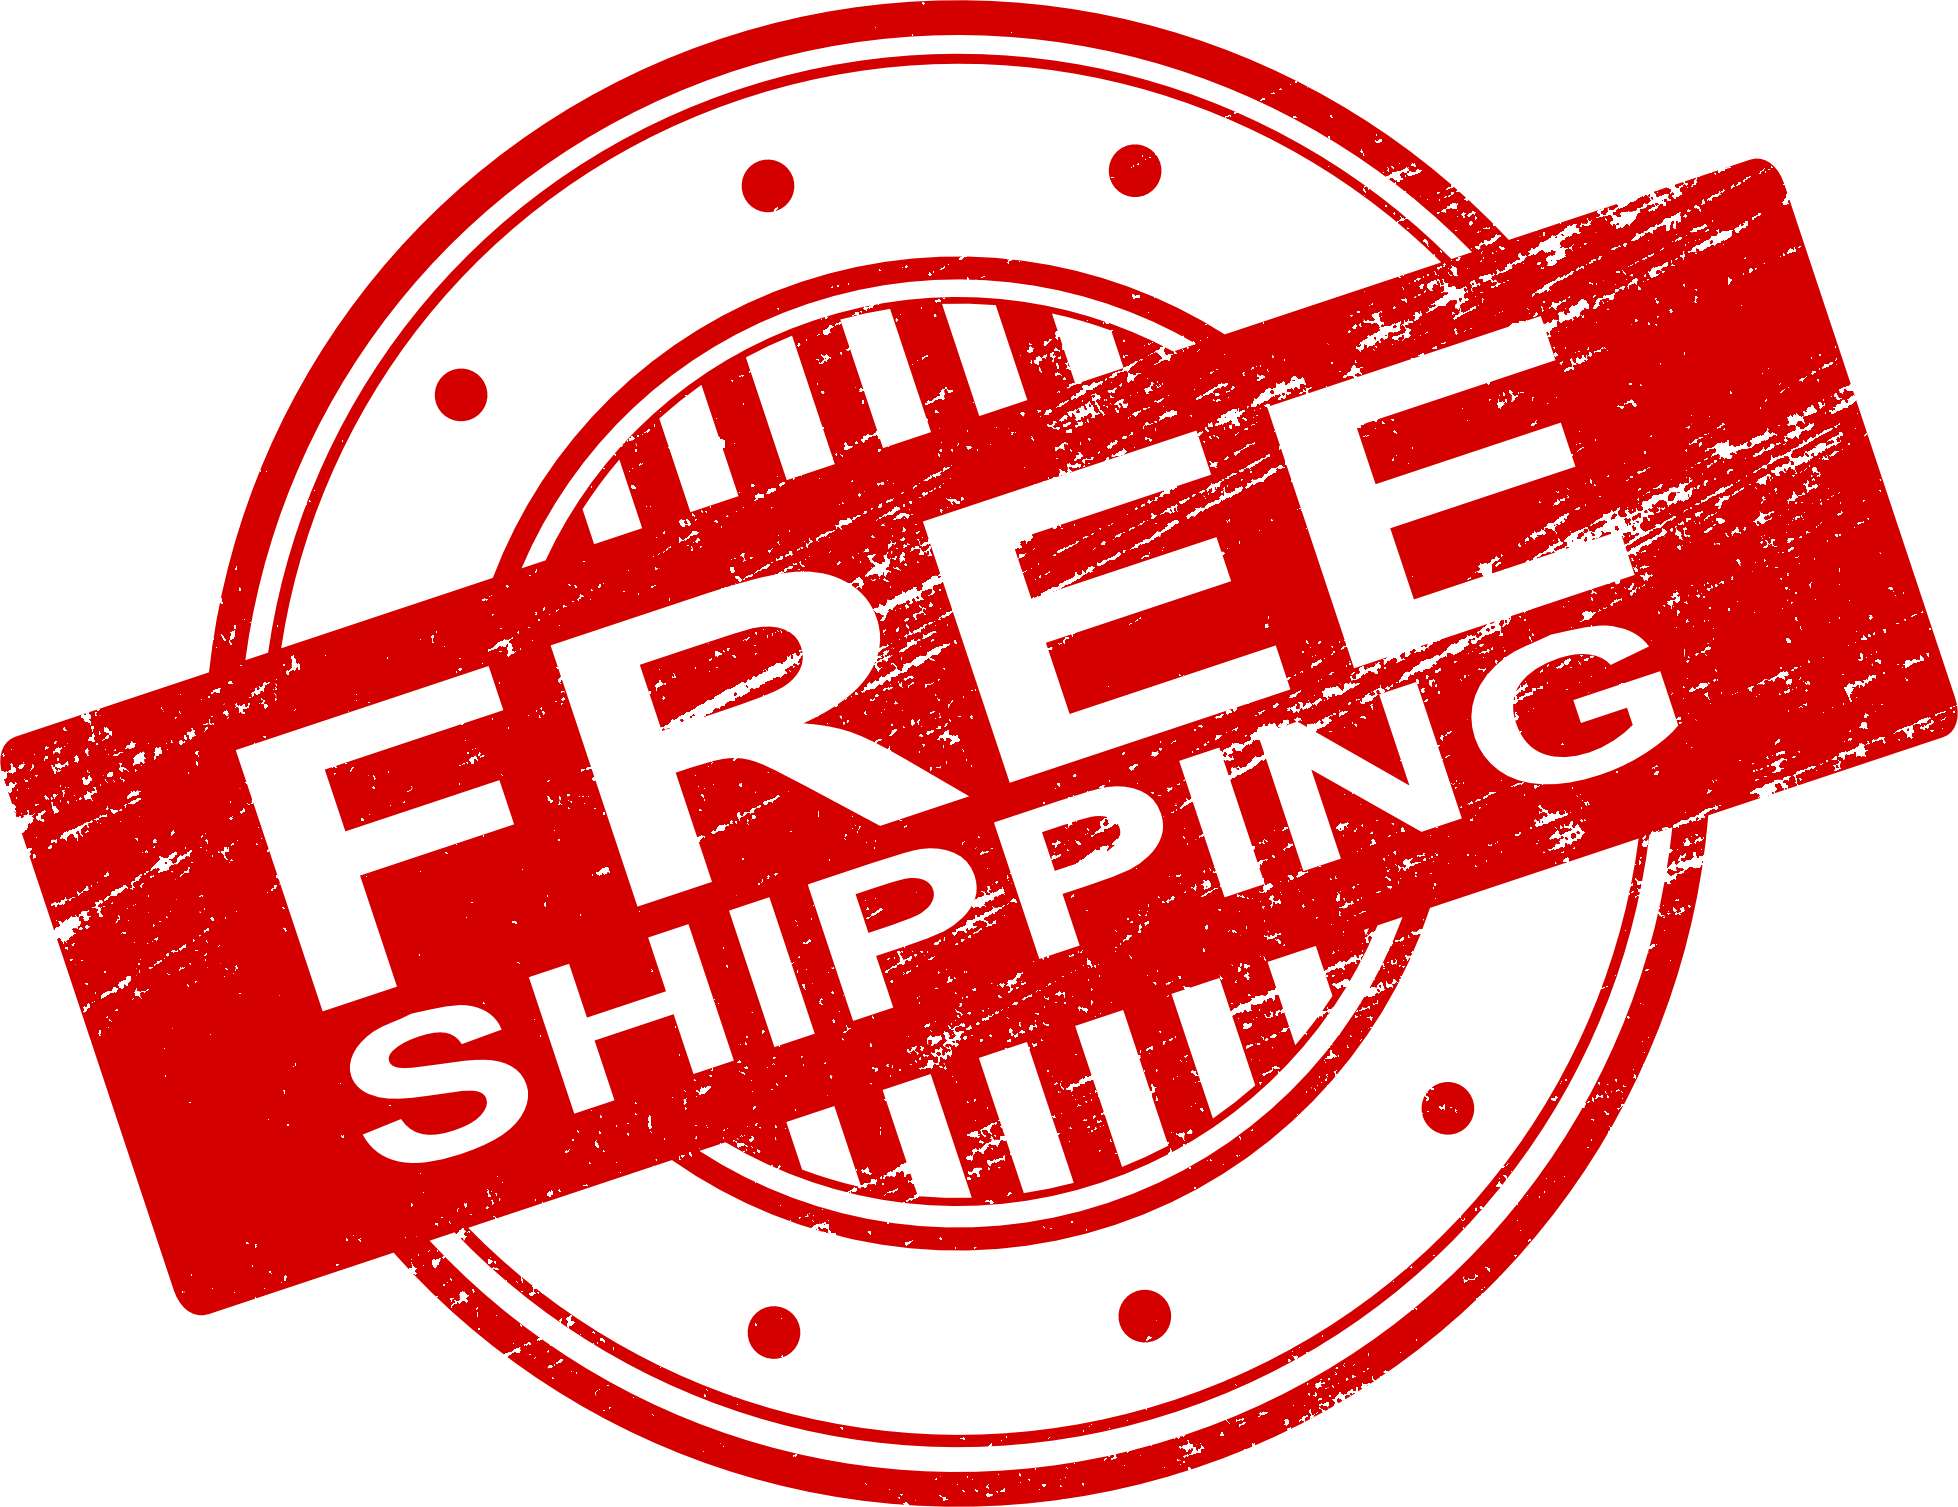 Free Shipping Png - Free Download (Free Shipping Stamp 3.png), Transparent background PNG HD thumbnail